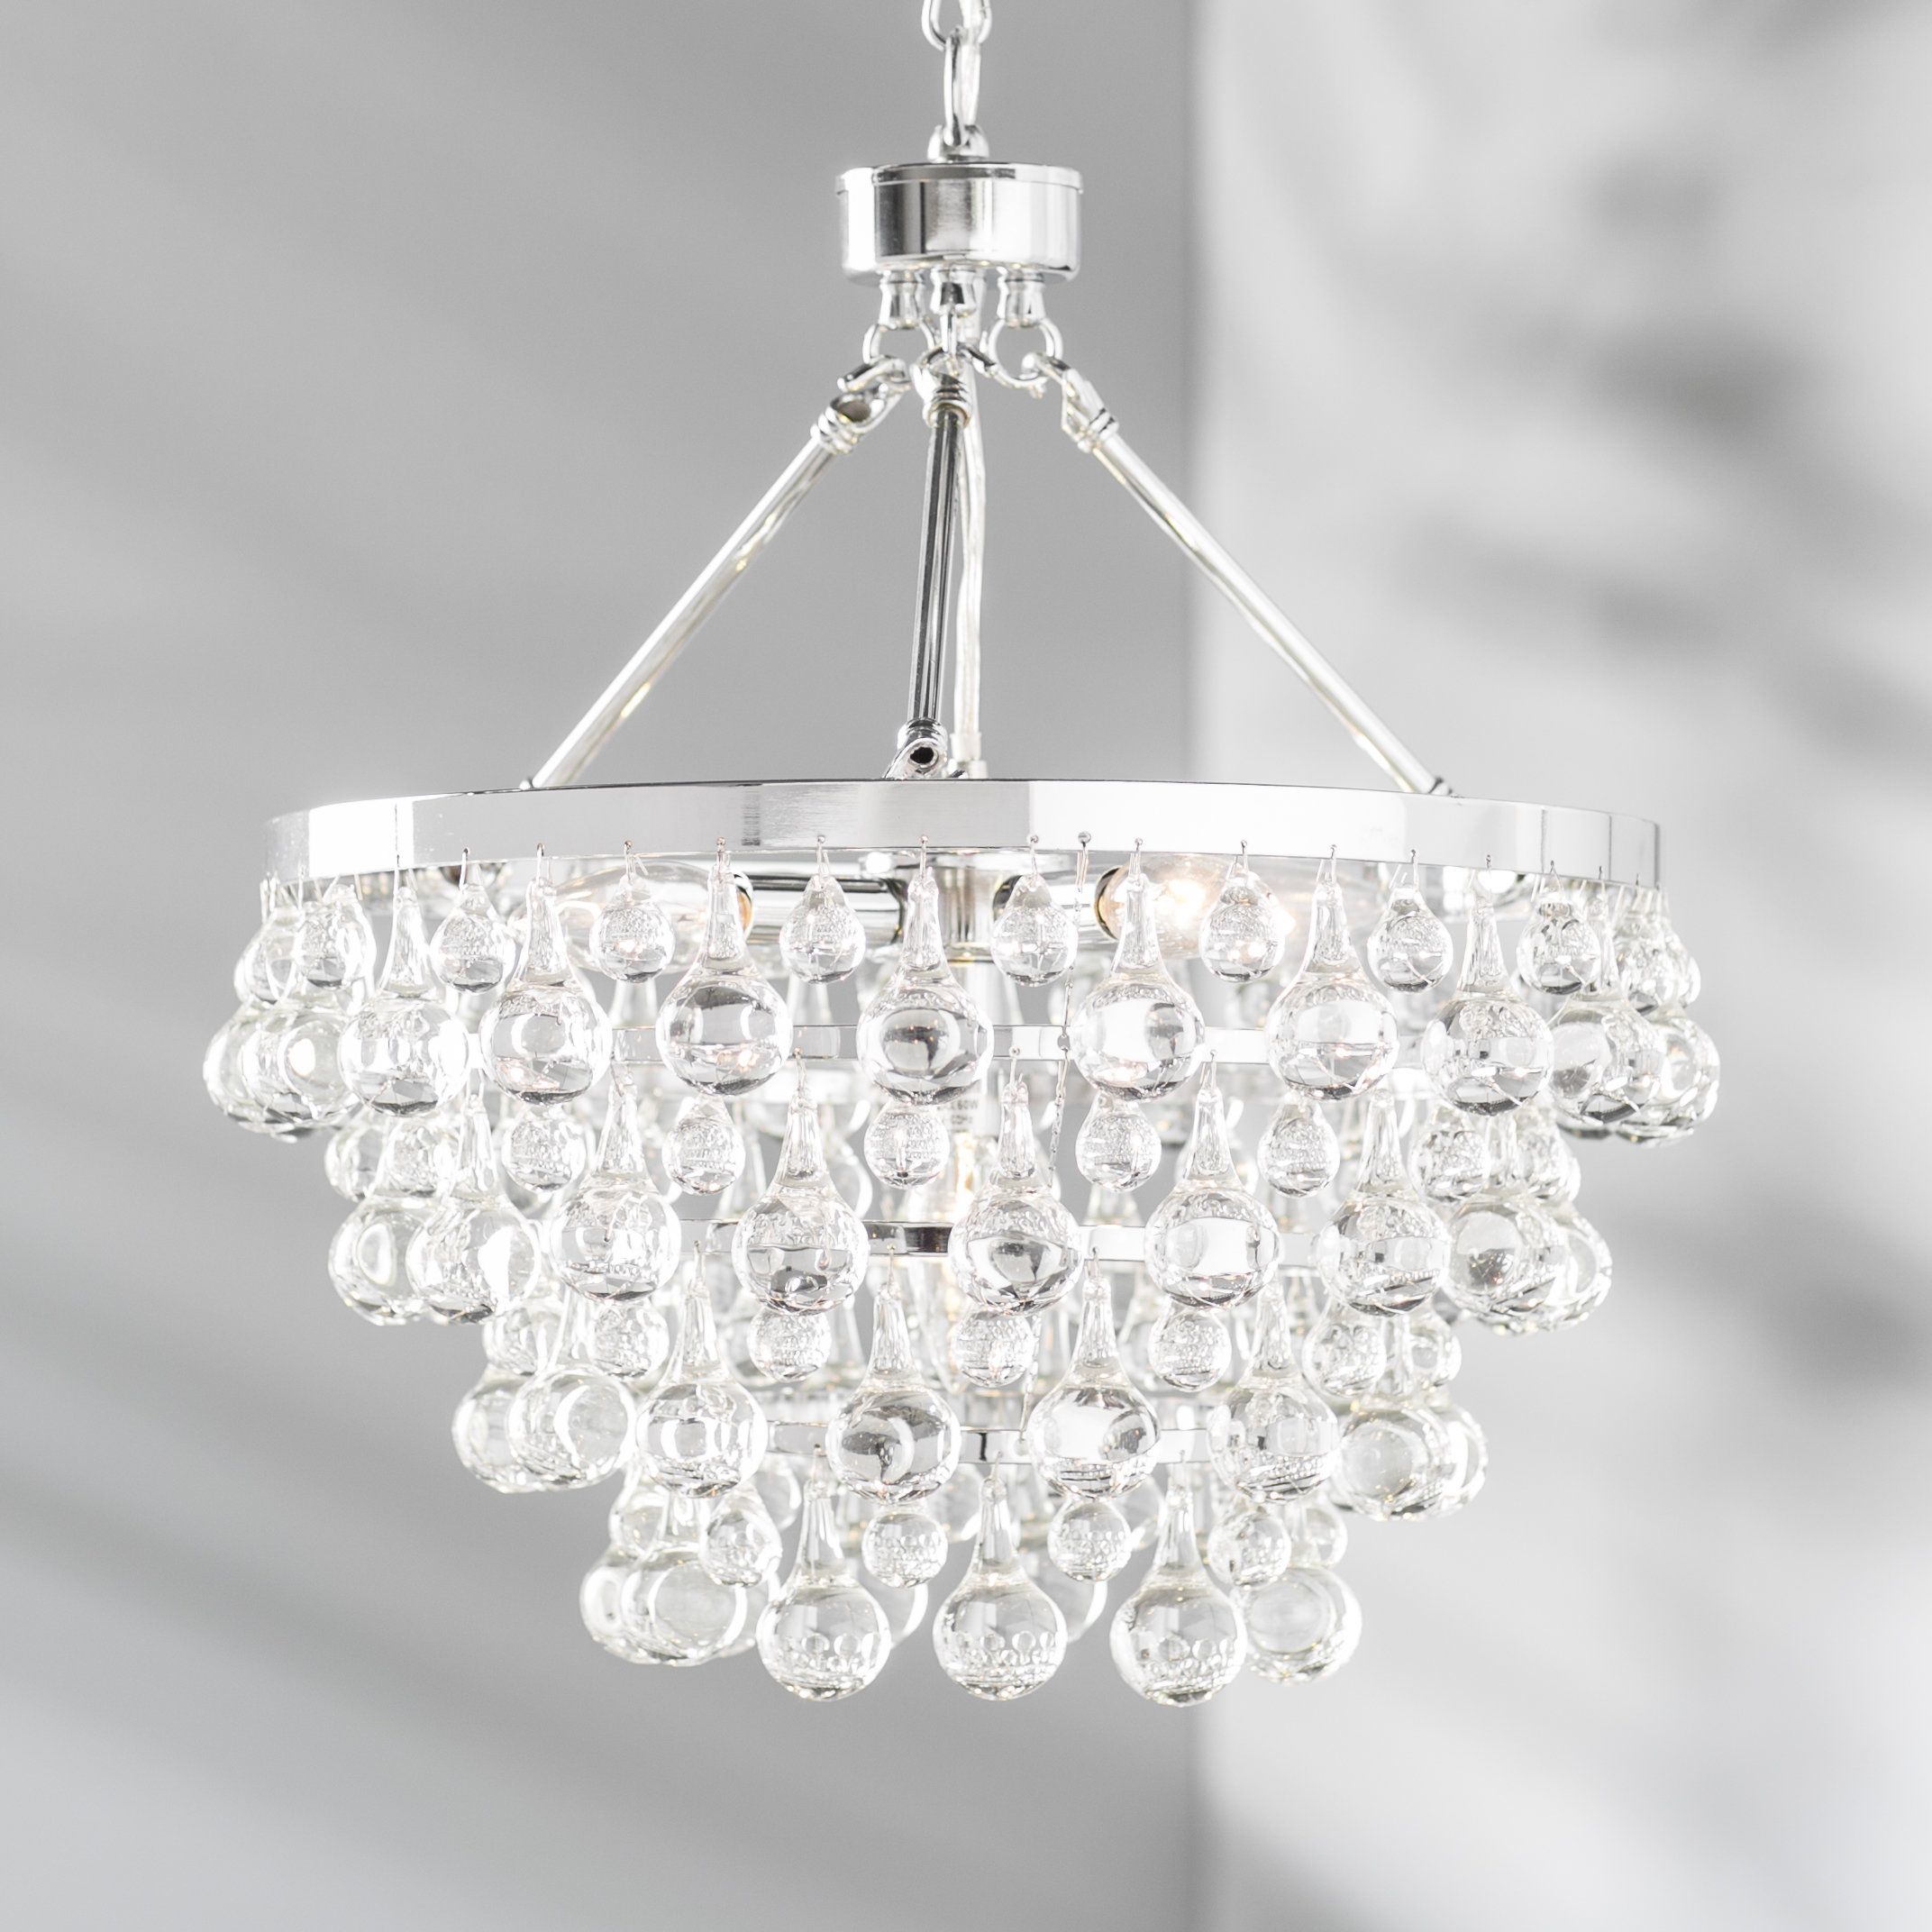 Willa Arlo Interiors Ahern 5 Light Crystal Chandelier With Ladonna 5 Light Novelty Chandeliers (View 12 of 30)